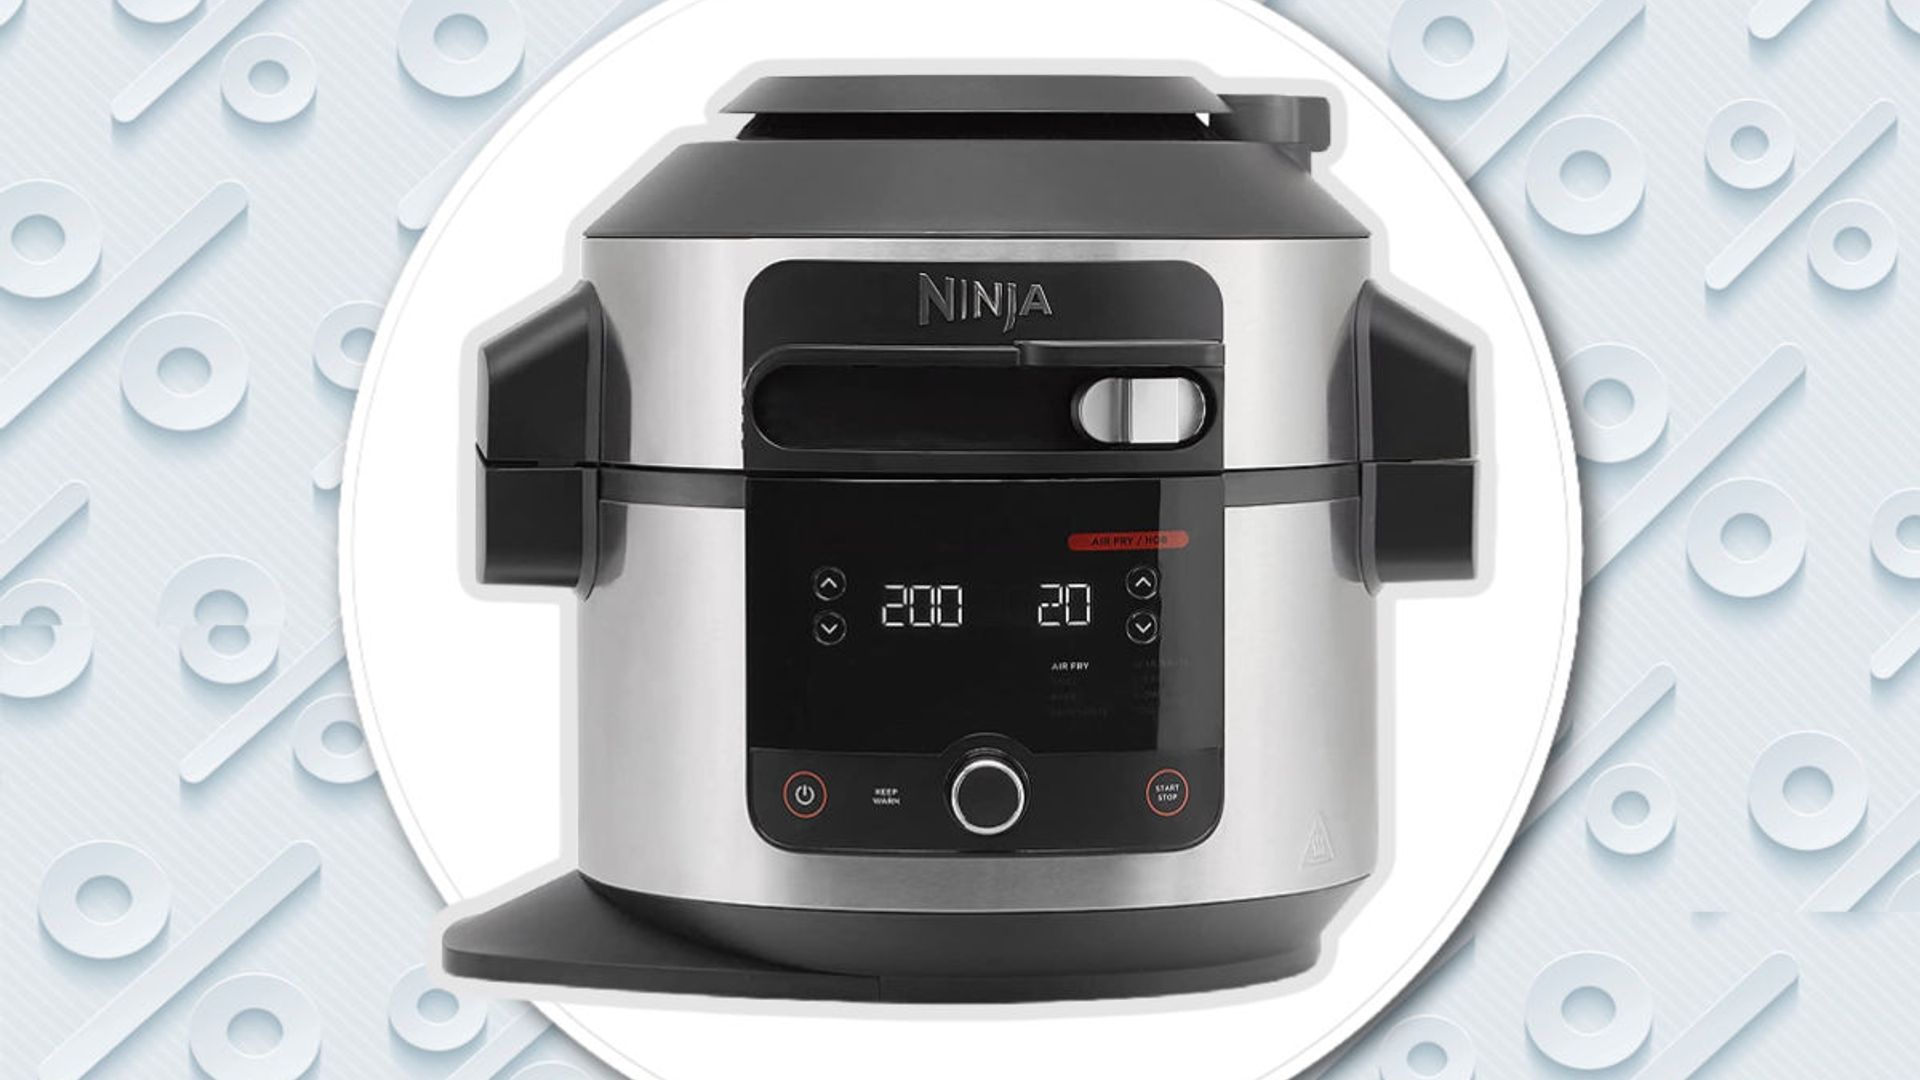 Ninja's 11-in-1 Smart Cooker is an air fryer and beyond - and its 30% off right now